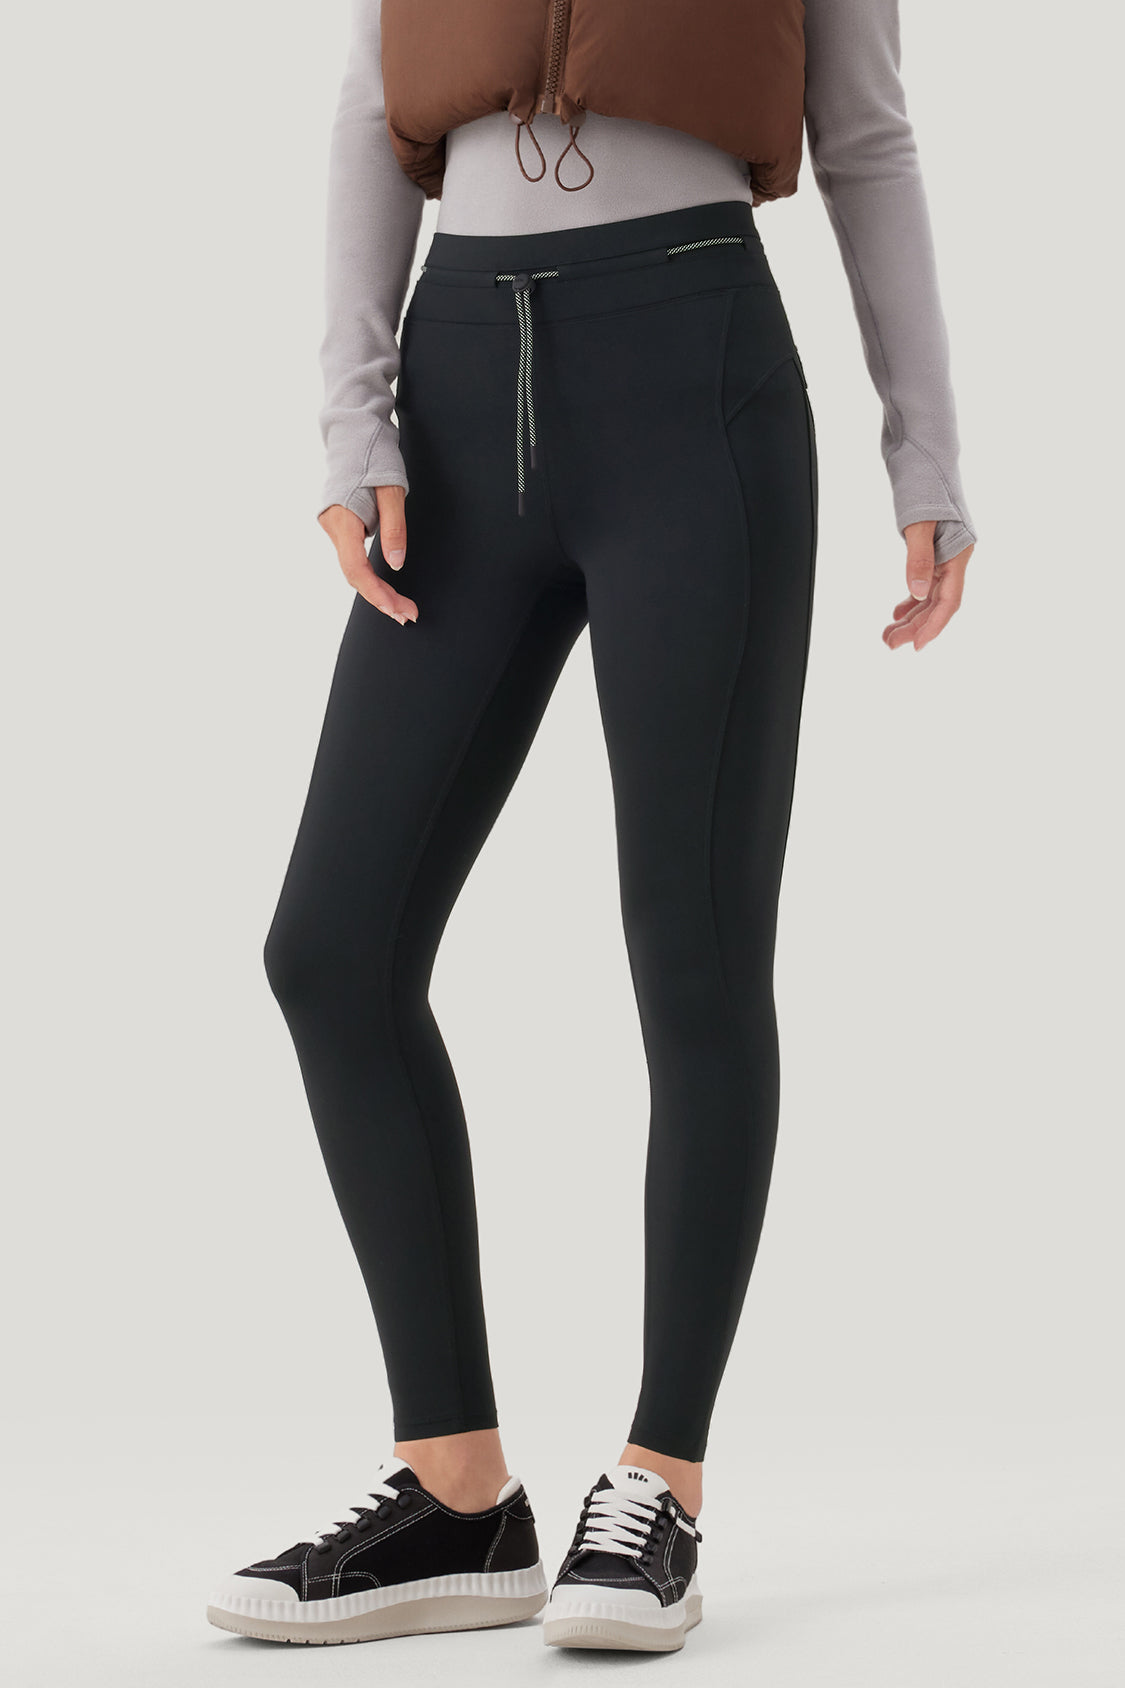 Winter Warm Translucent High Waist Thermal Thin Thermal Leggings With  Elastic Wool Stockings And Sexy Velvet Design For Women From Elroyelissa,  $19.39